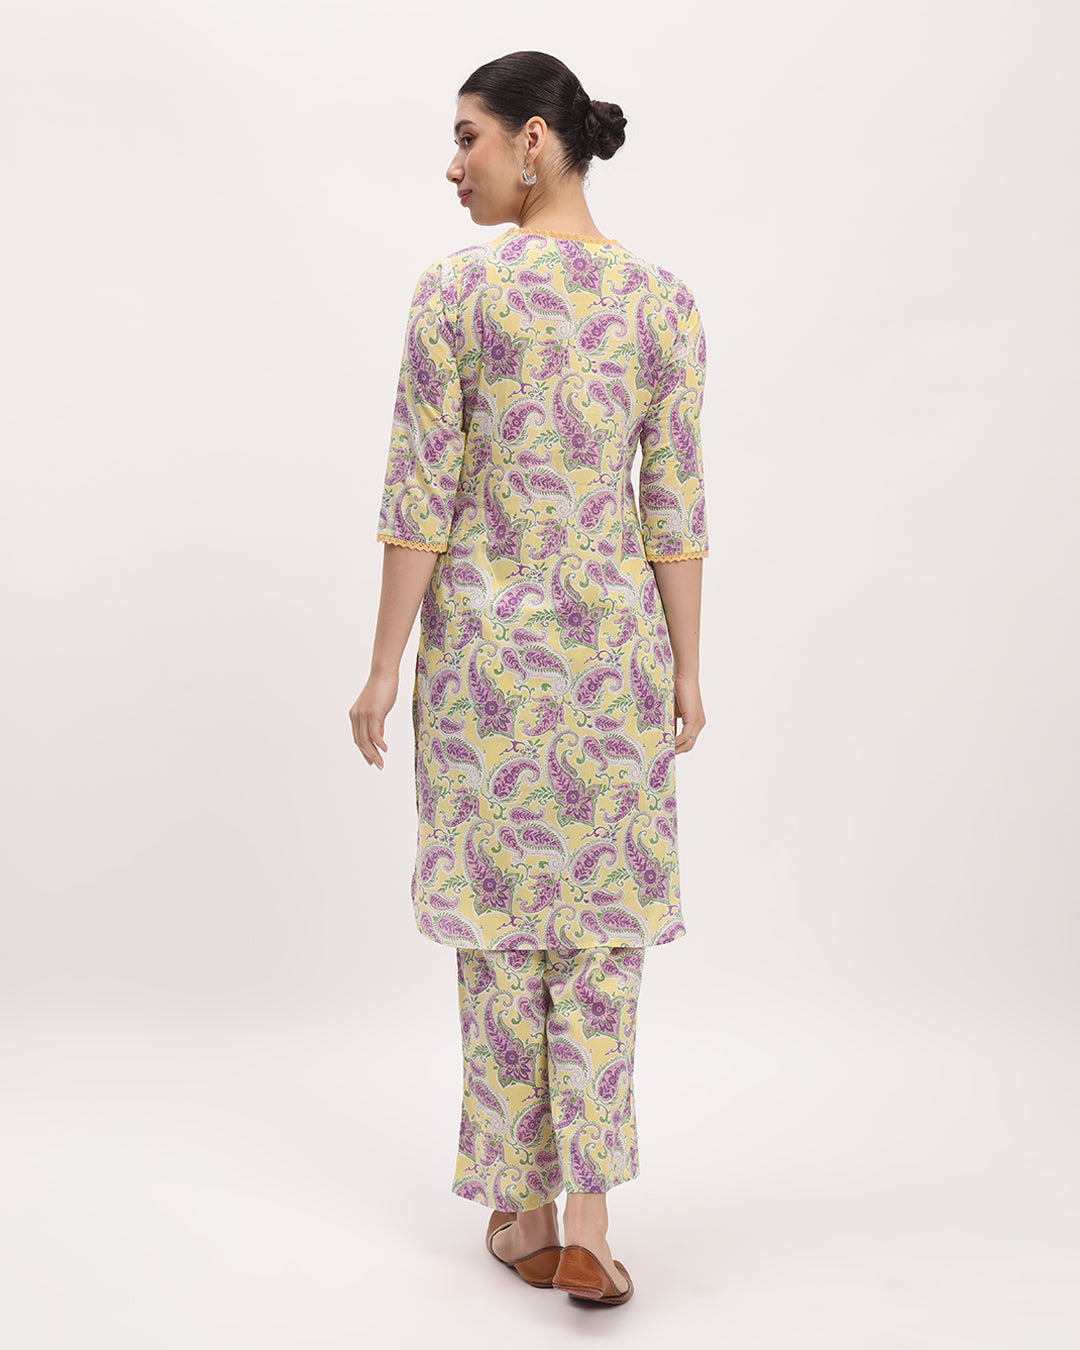 Combo: Lavender Paisley & English Floral Garden Lace Affair Printed Kurta (Without Bottoms)